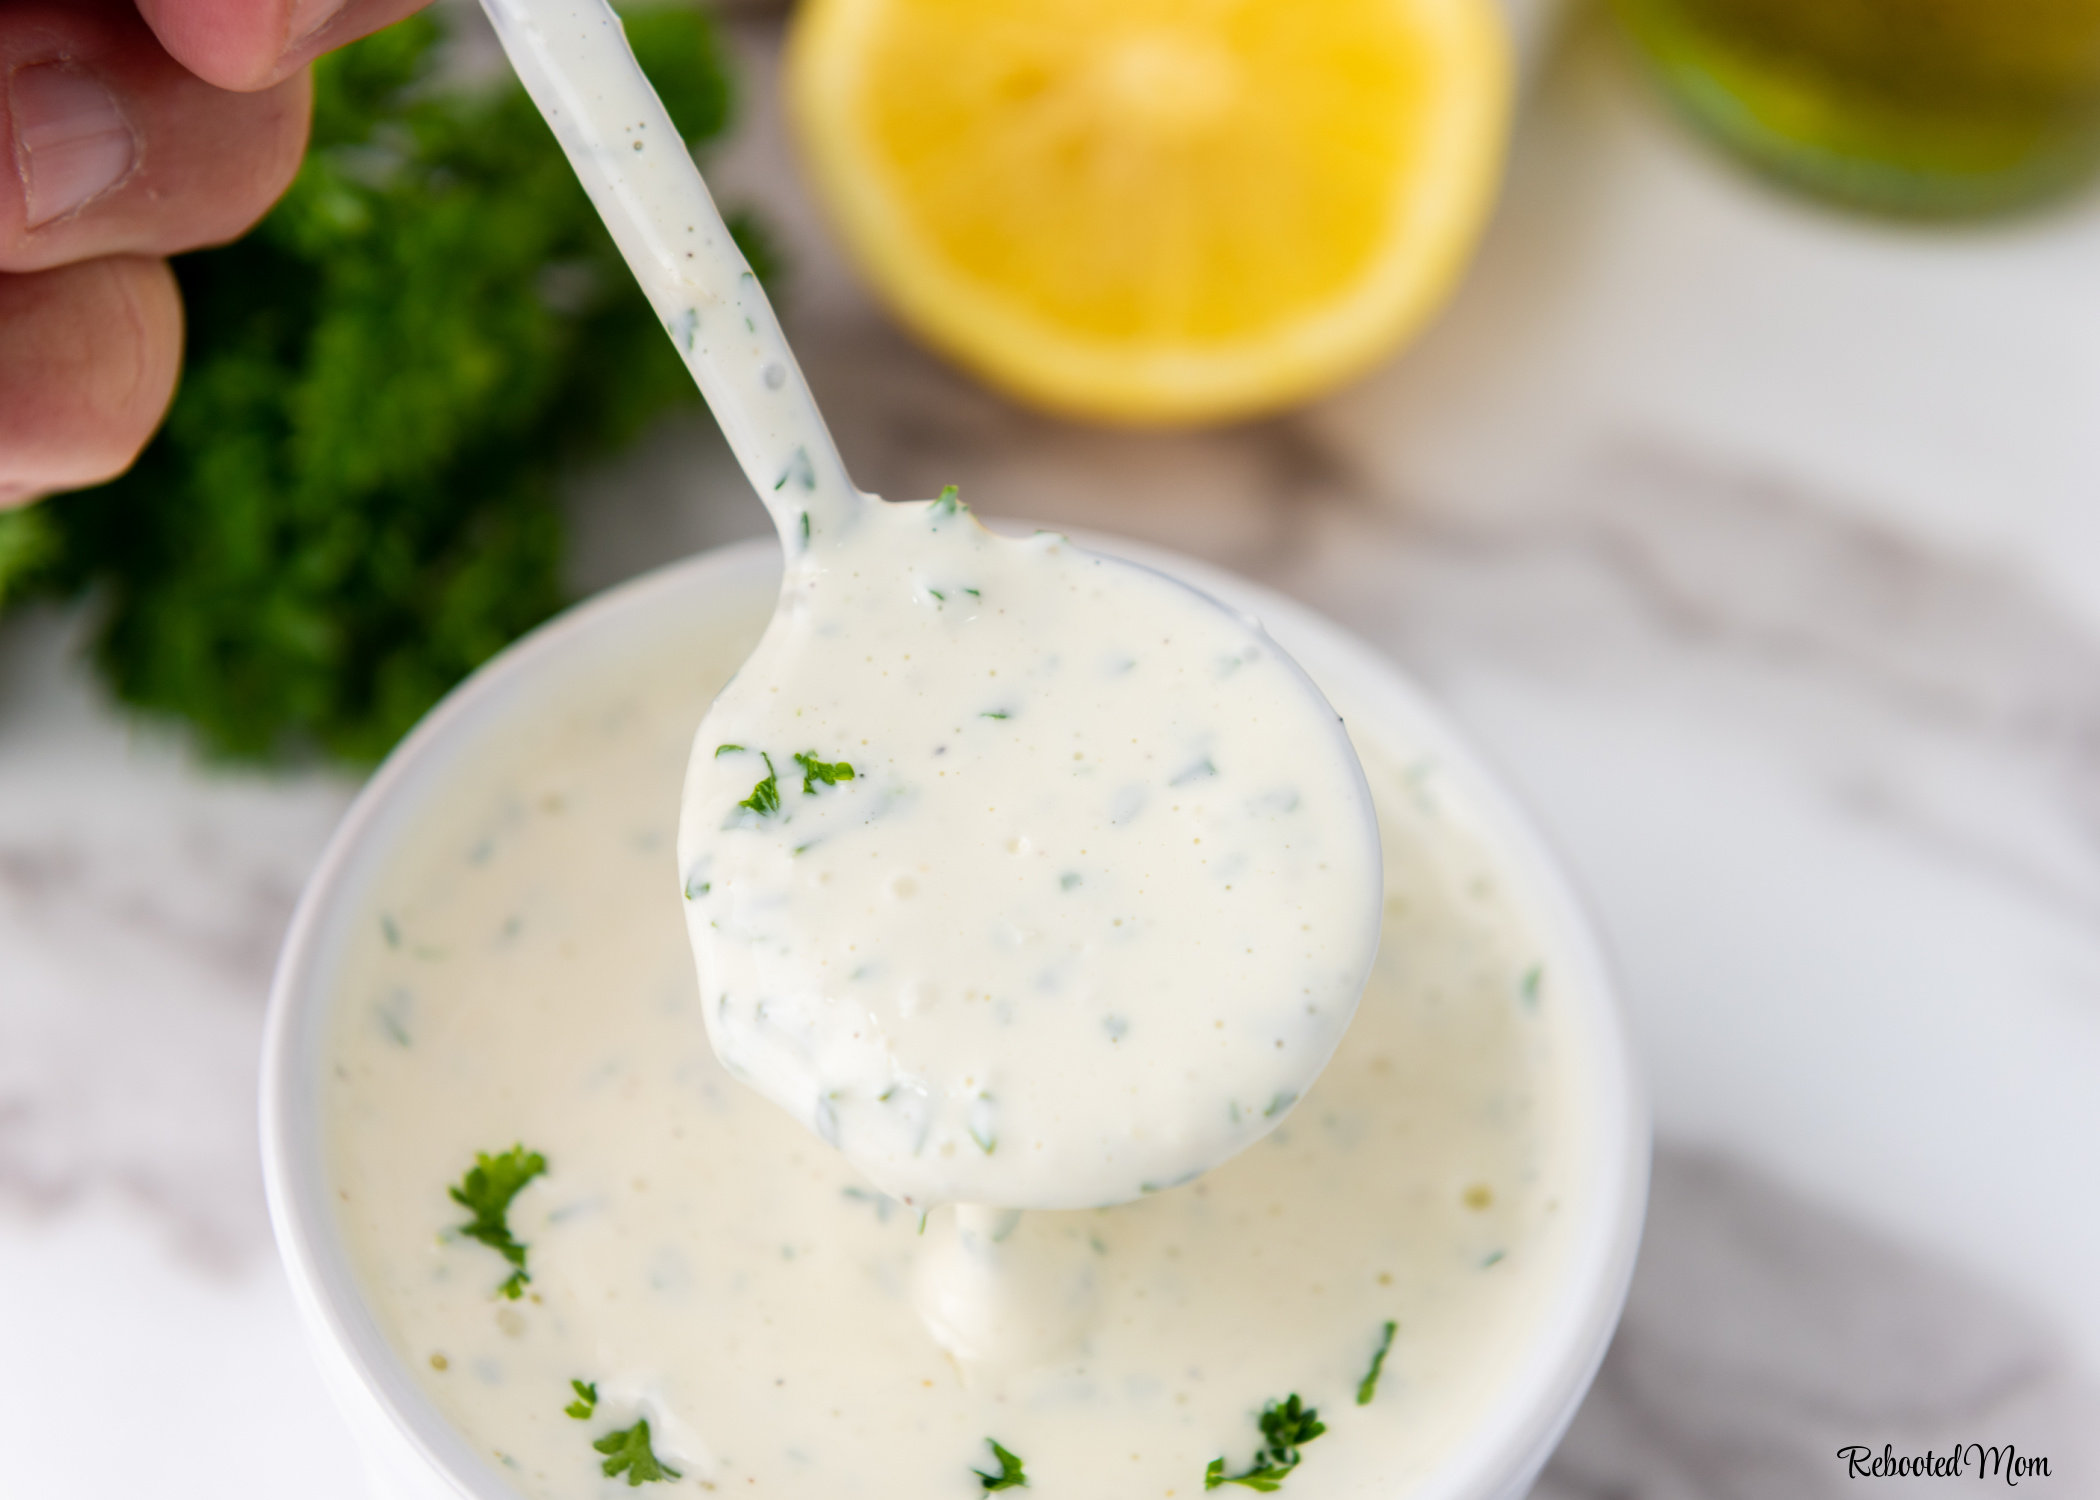 Easy to make Garlic Dipping Sauce, perfect for French fries, tacos, burgers, fish and so much more - throw this sauce together in just five minutes!